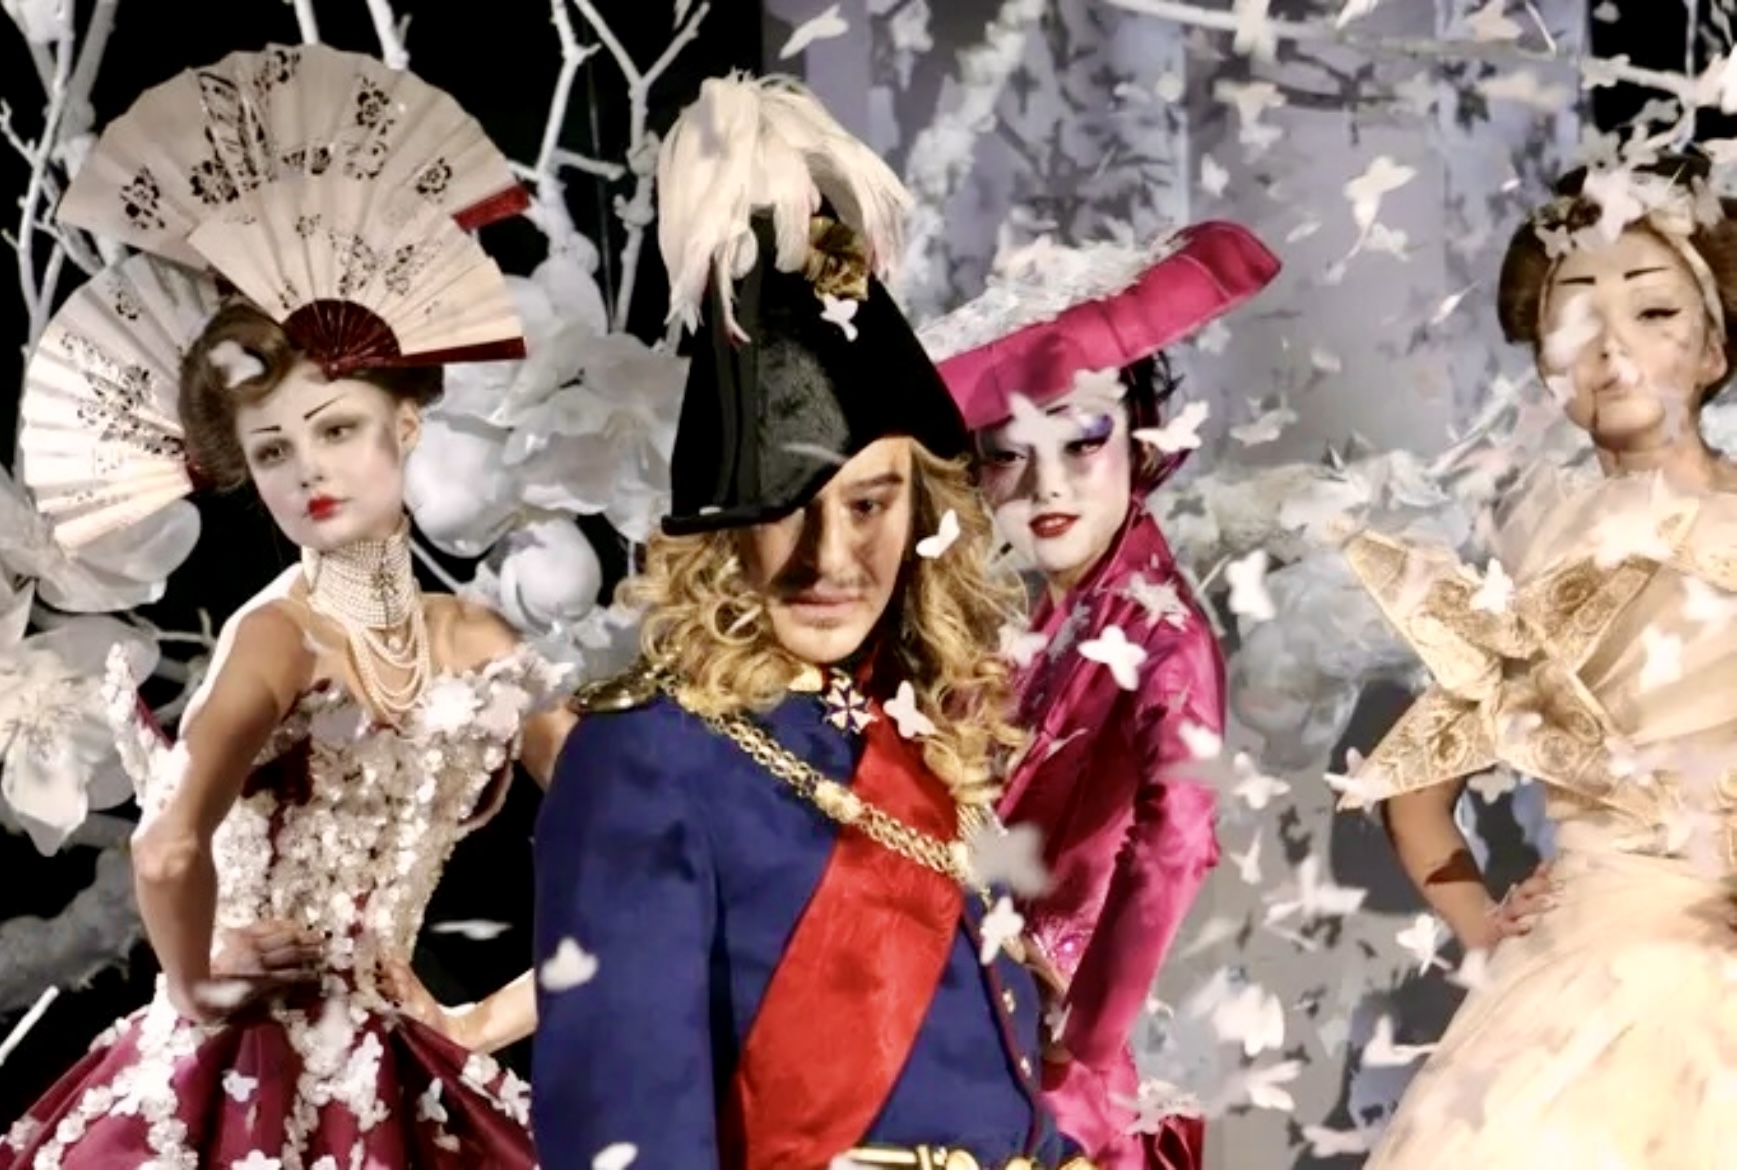 High & Low – John Galliano is a riveting portrait of the deeply complex king of haute couture